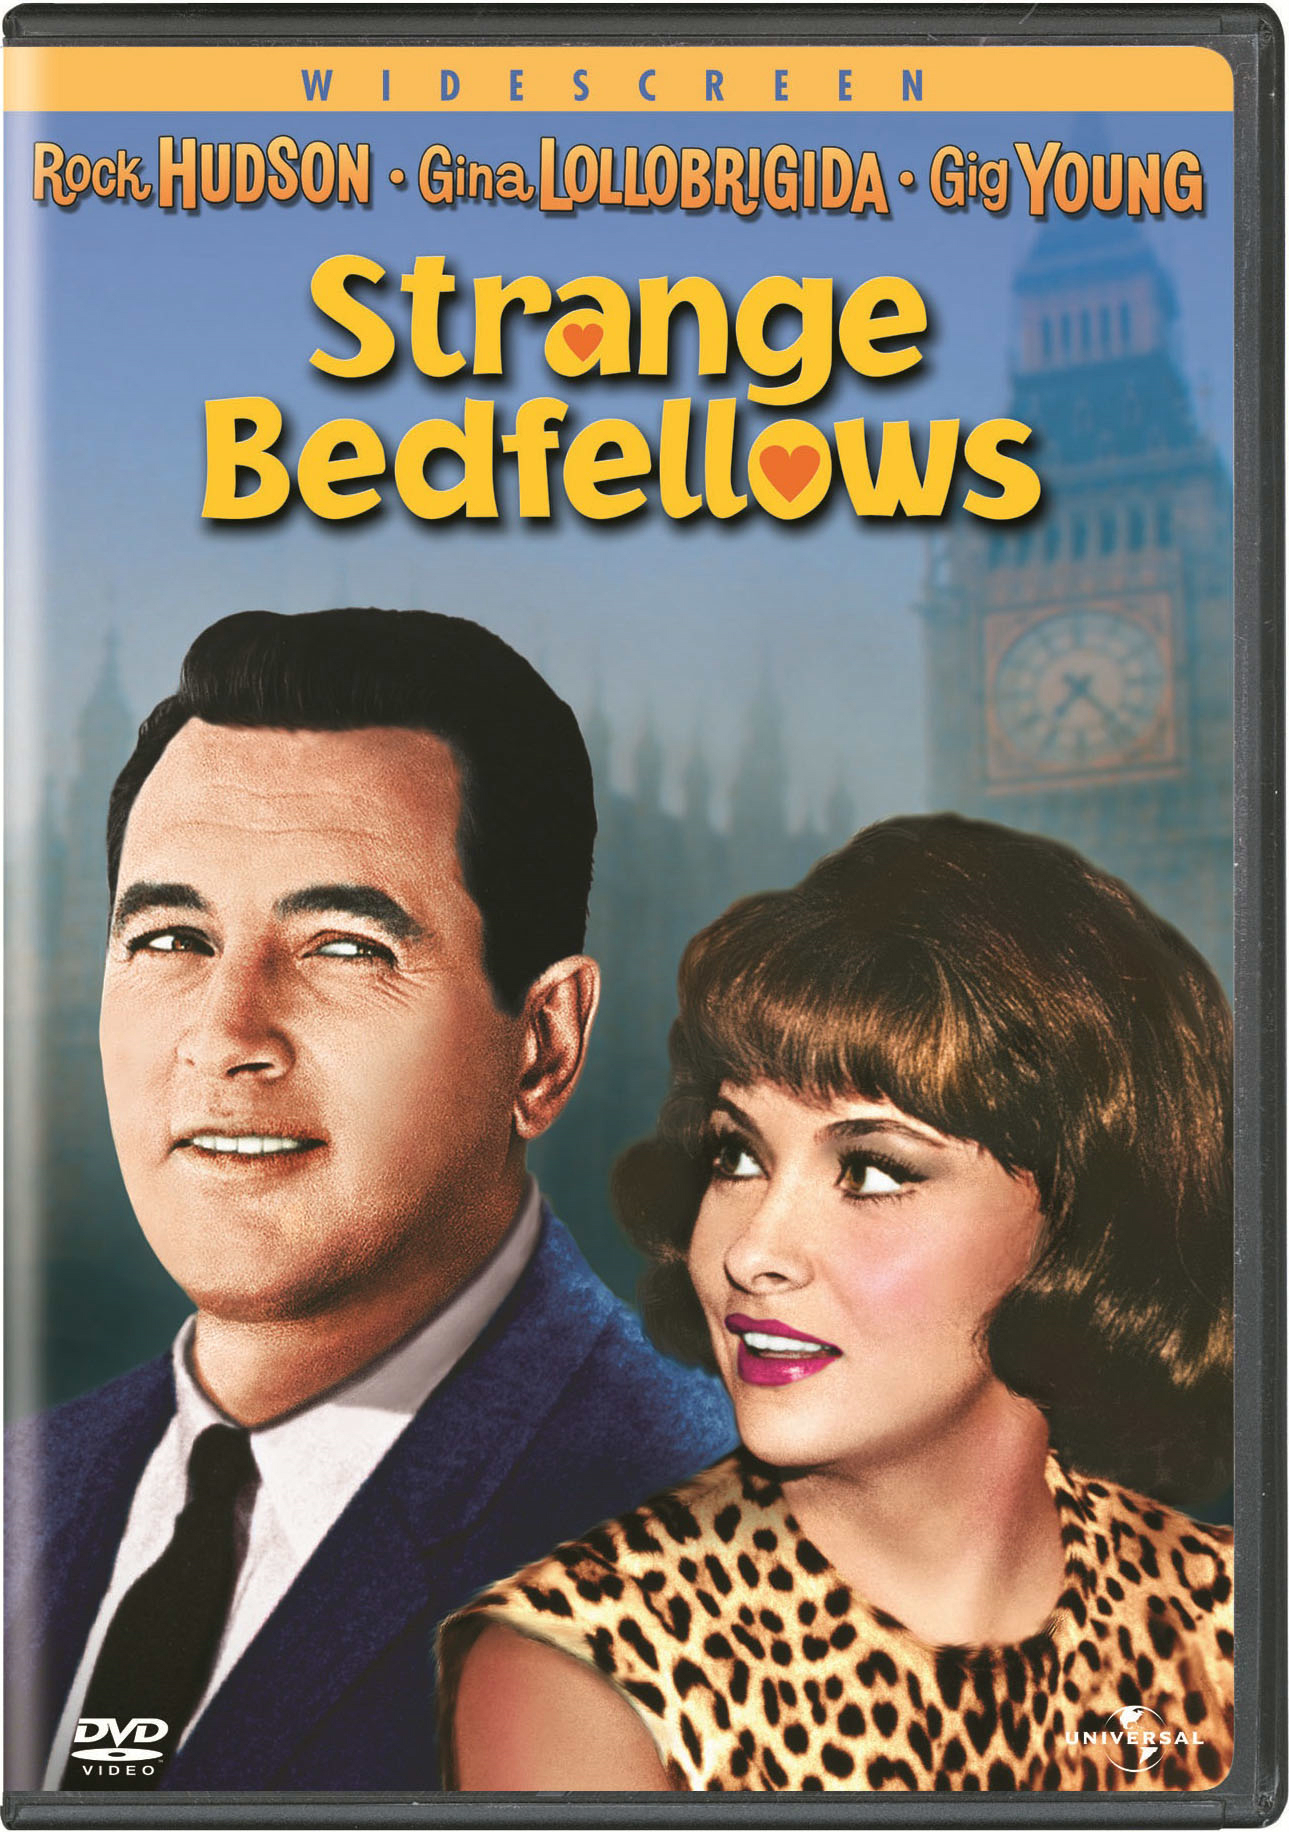 Strange Bedfellows (DVD Widescreen) - DVD [ 1965 ]  - Comedy Movies On DVD - Movies On GRUV